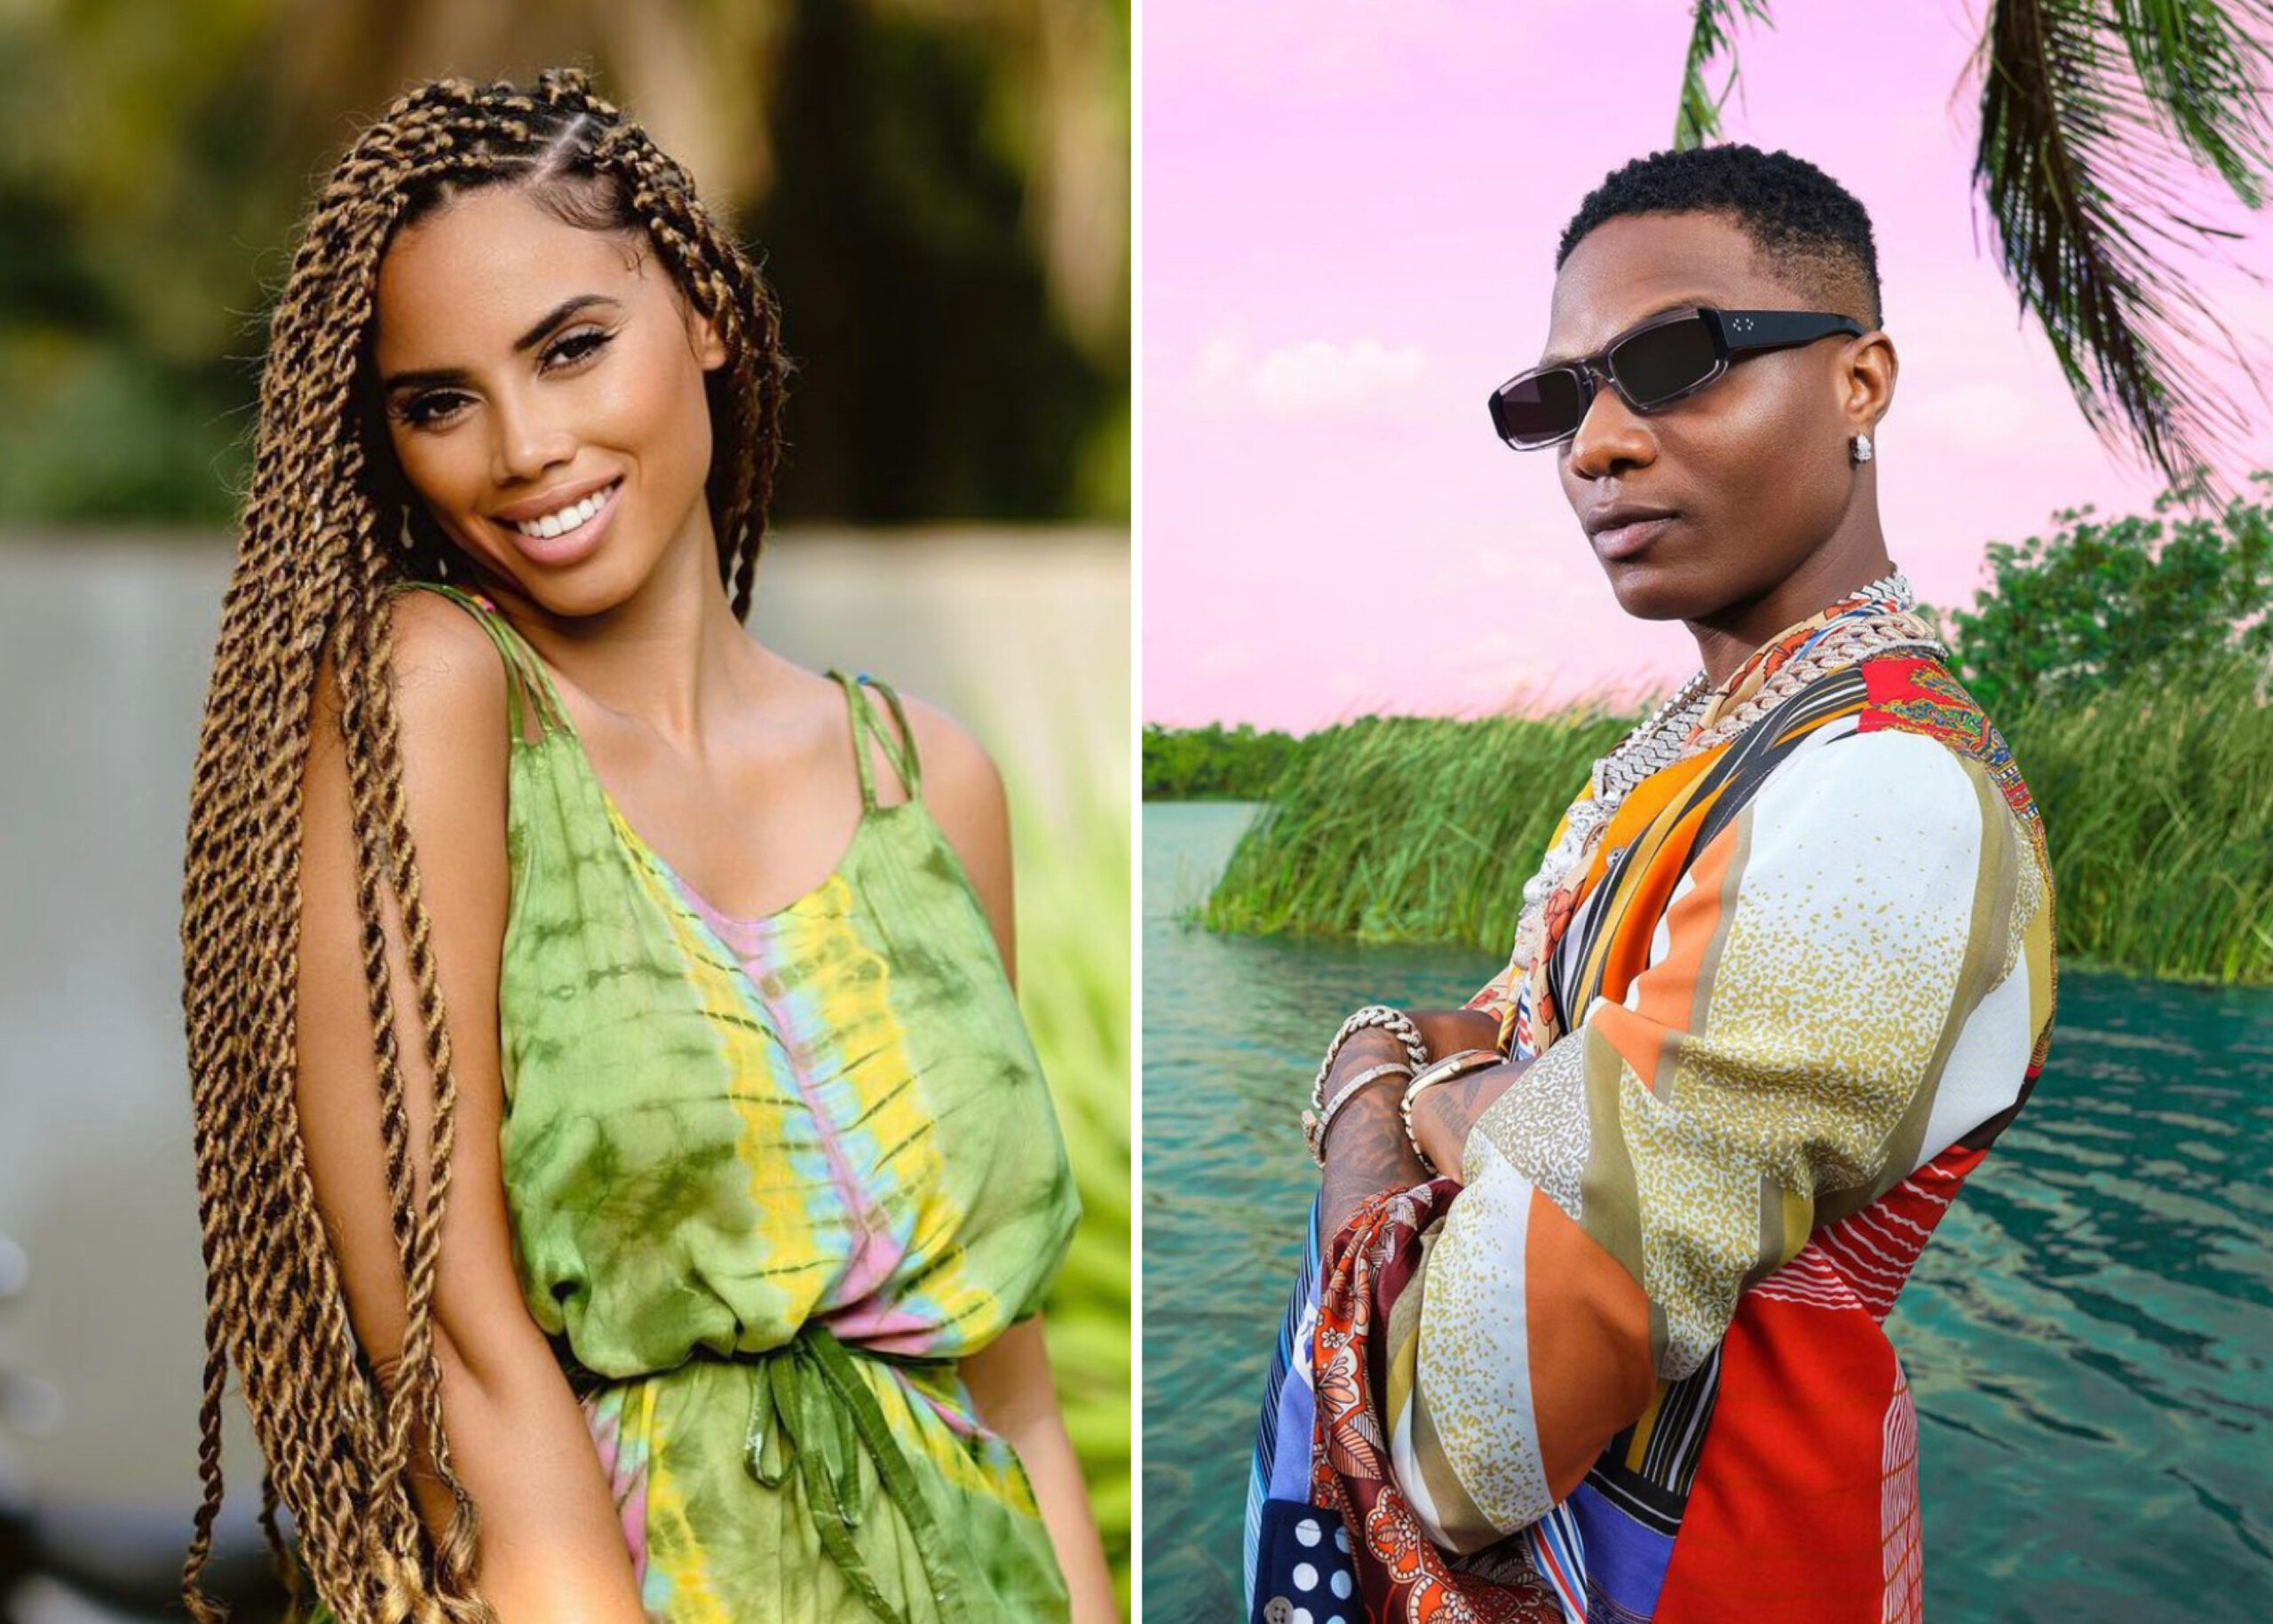 Jada Pollock Recounts How She Met Wizkid, Says It's Degrading Being Addressed As His '3rd Baby Mama'